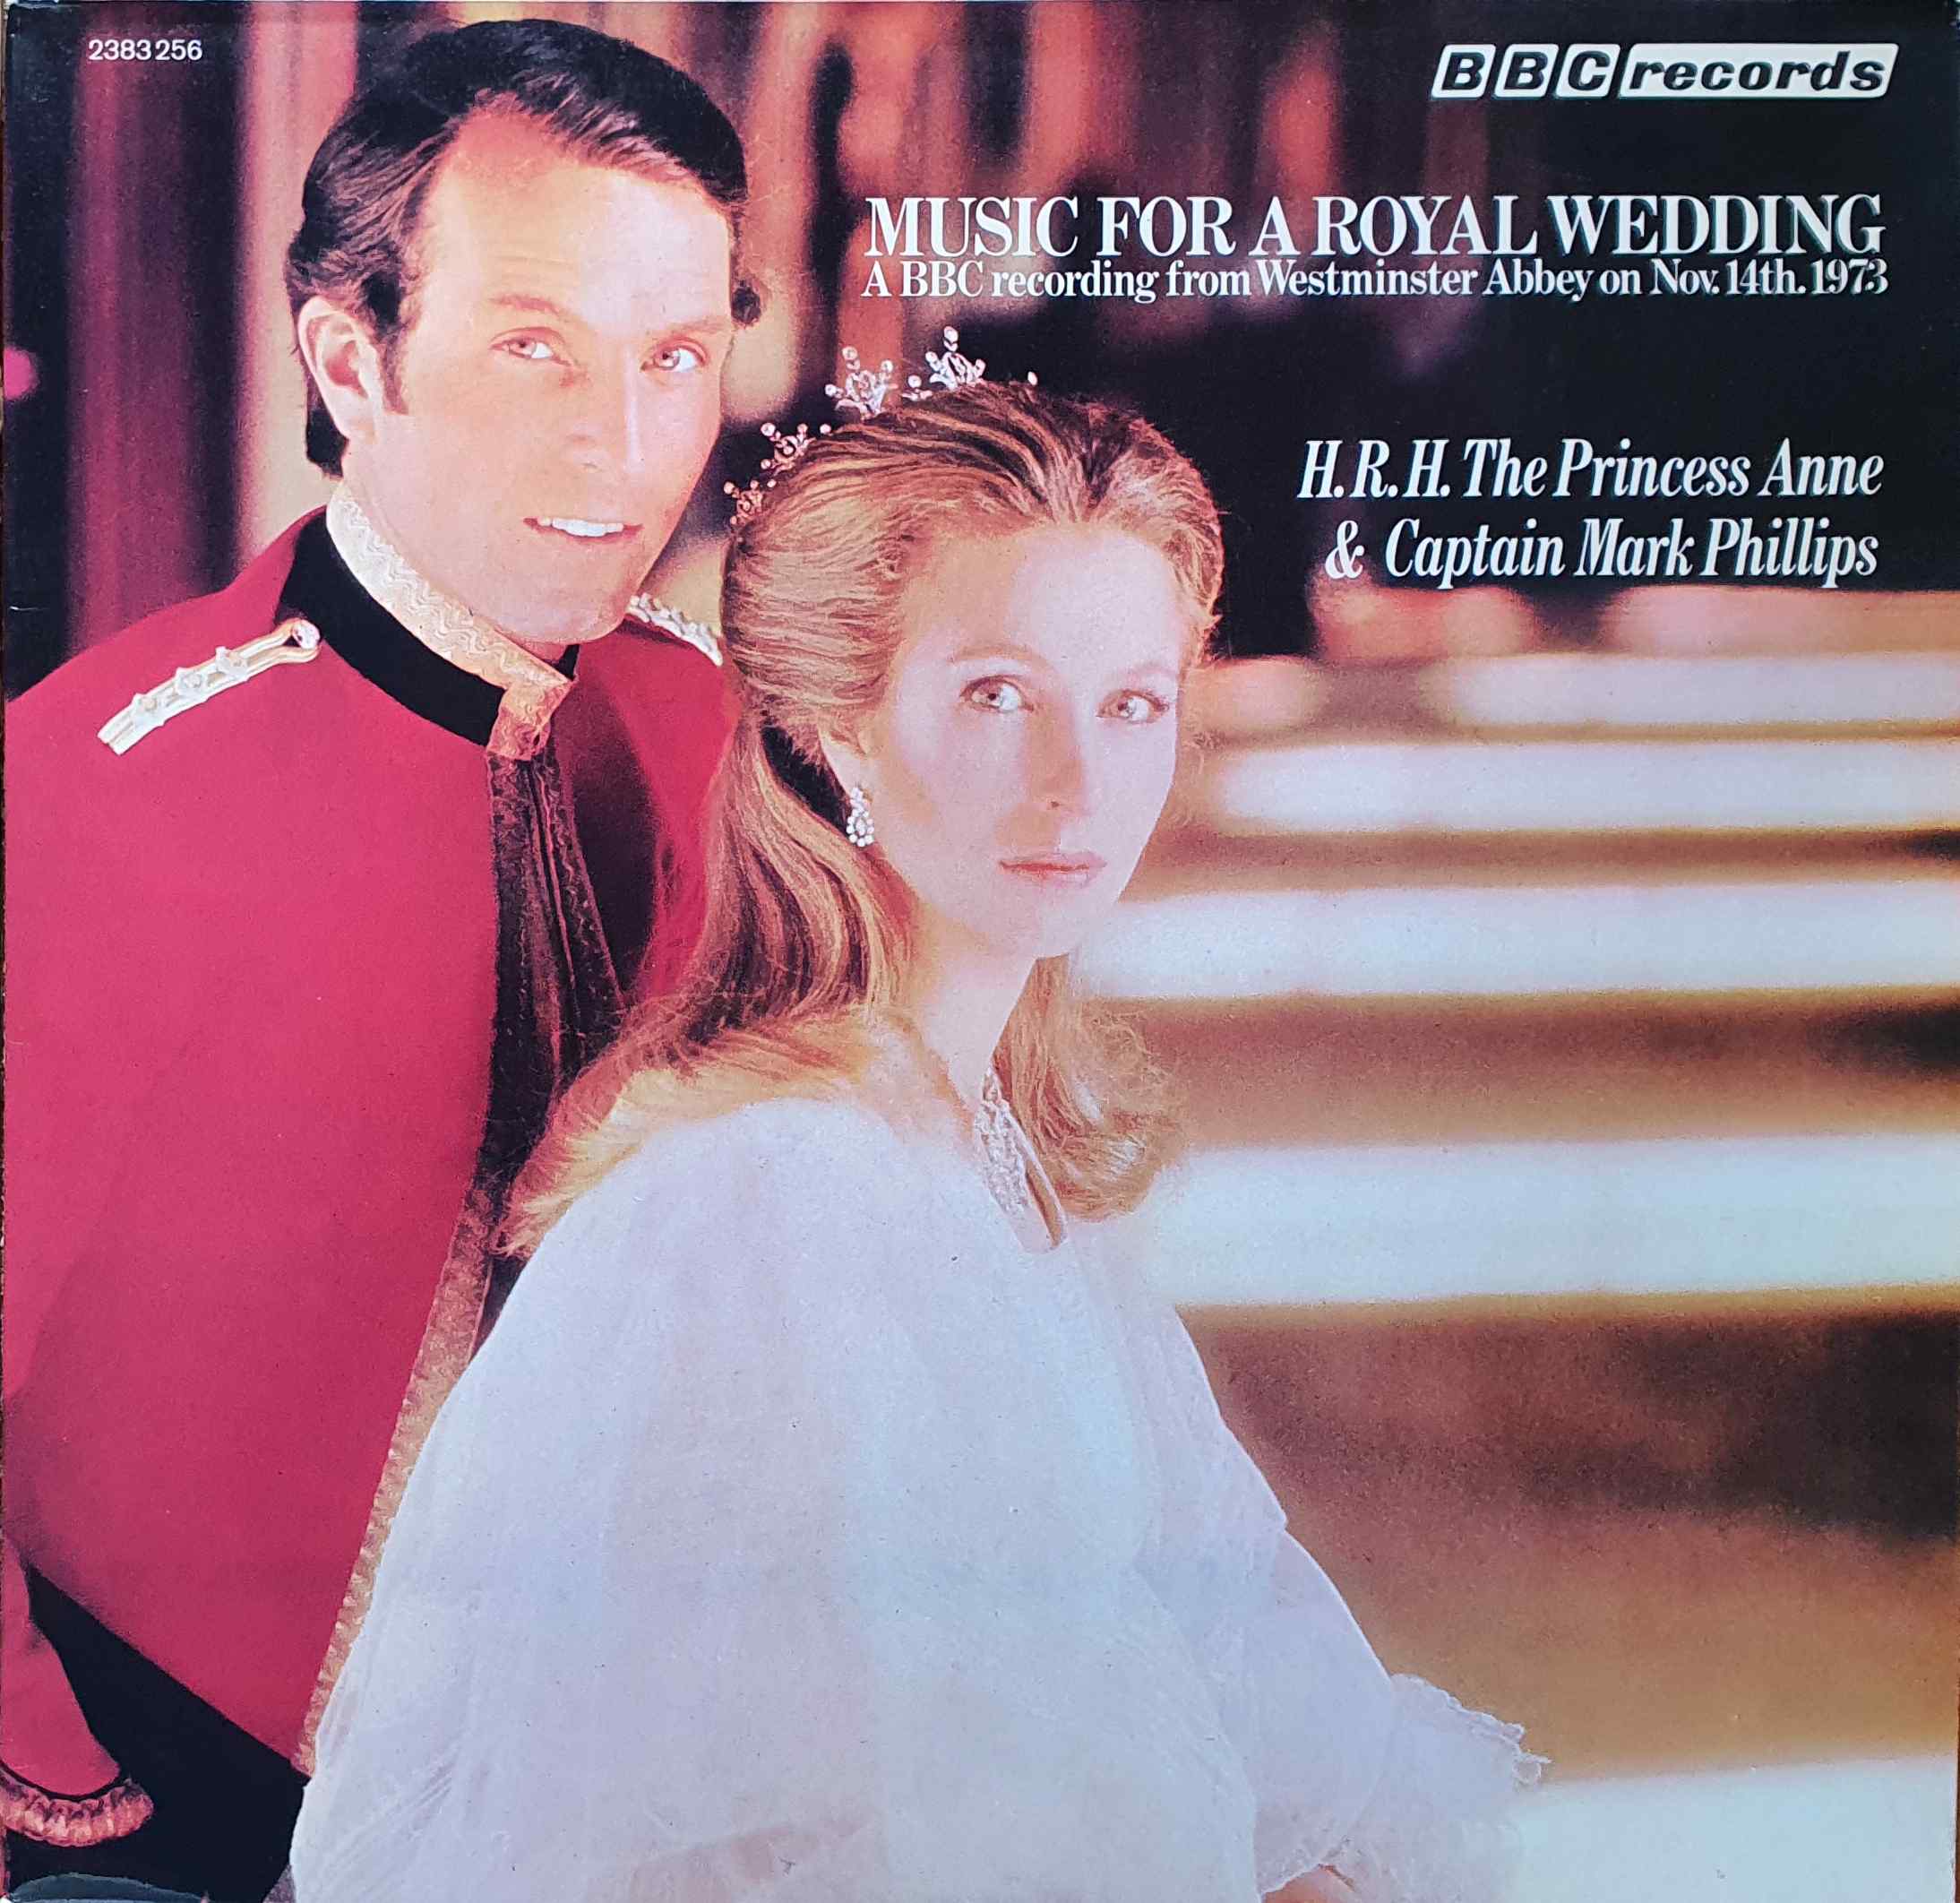 Picture of 2383 256 Music for a Royal wedding (Australian import) by artist Various from the BBC albums - Records and Tapes library